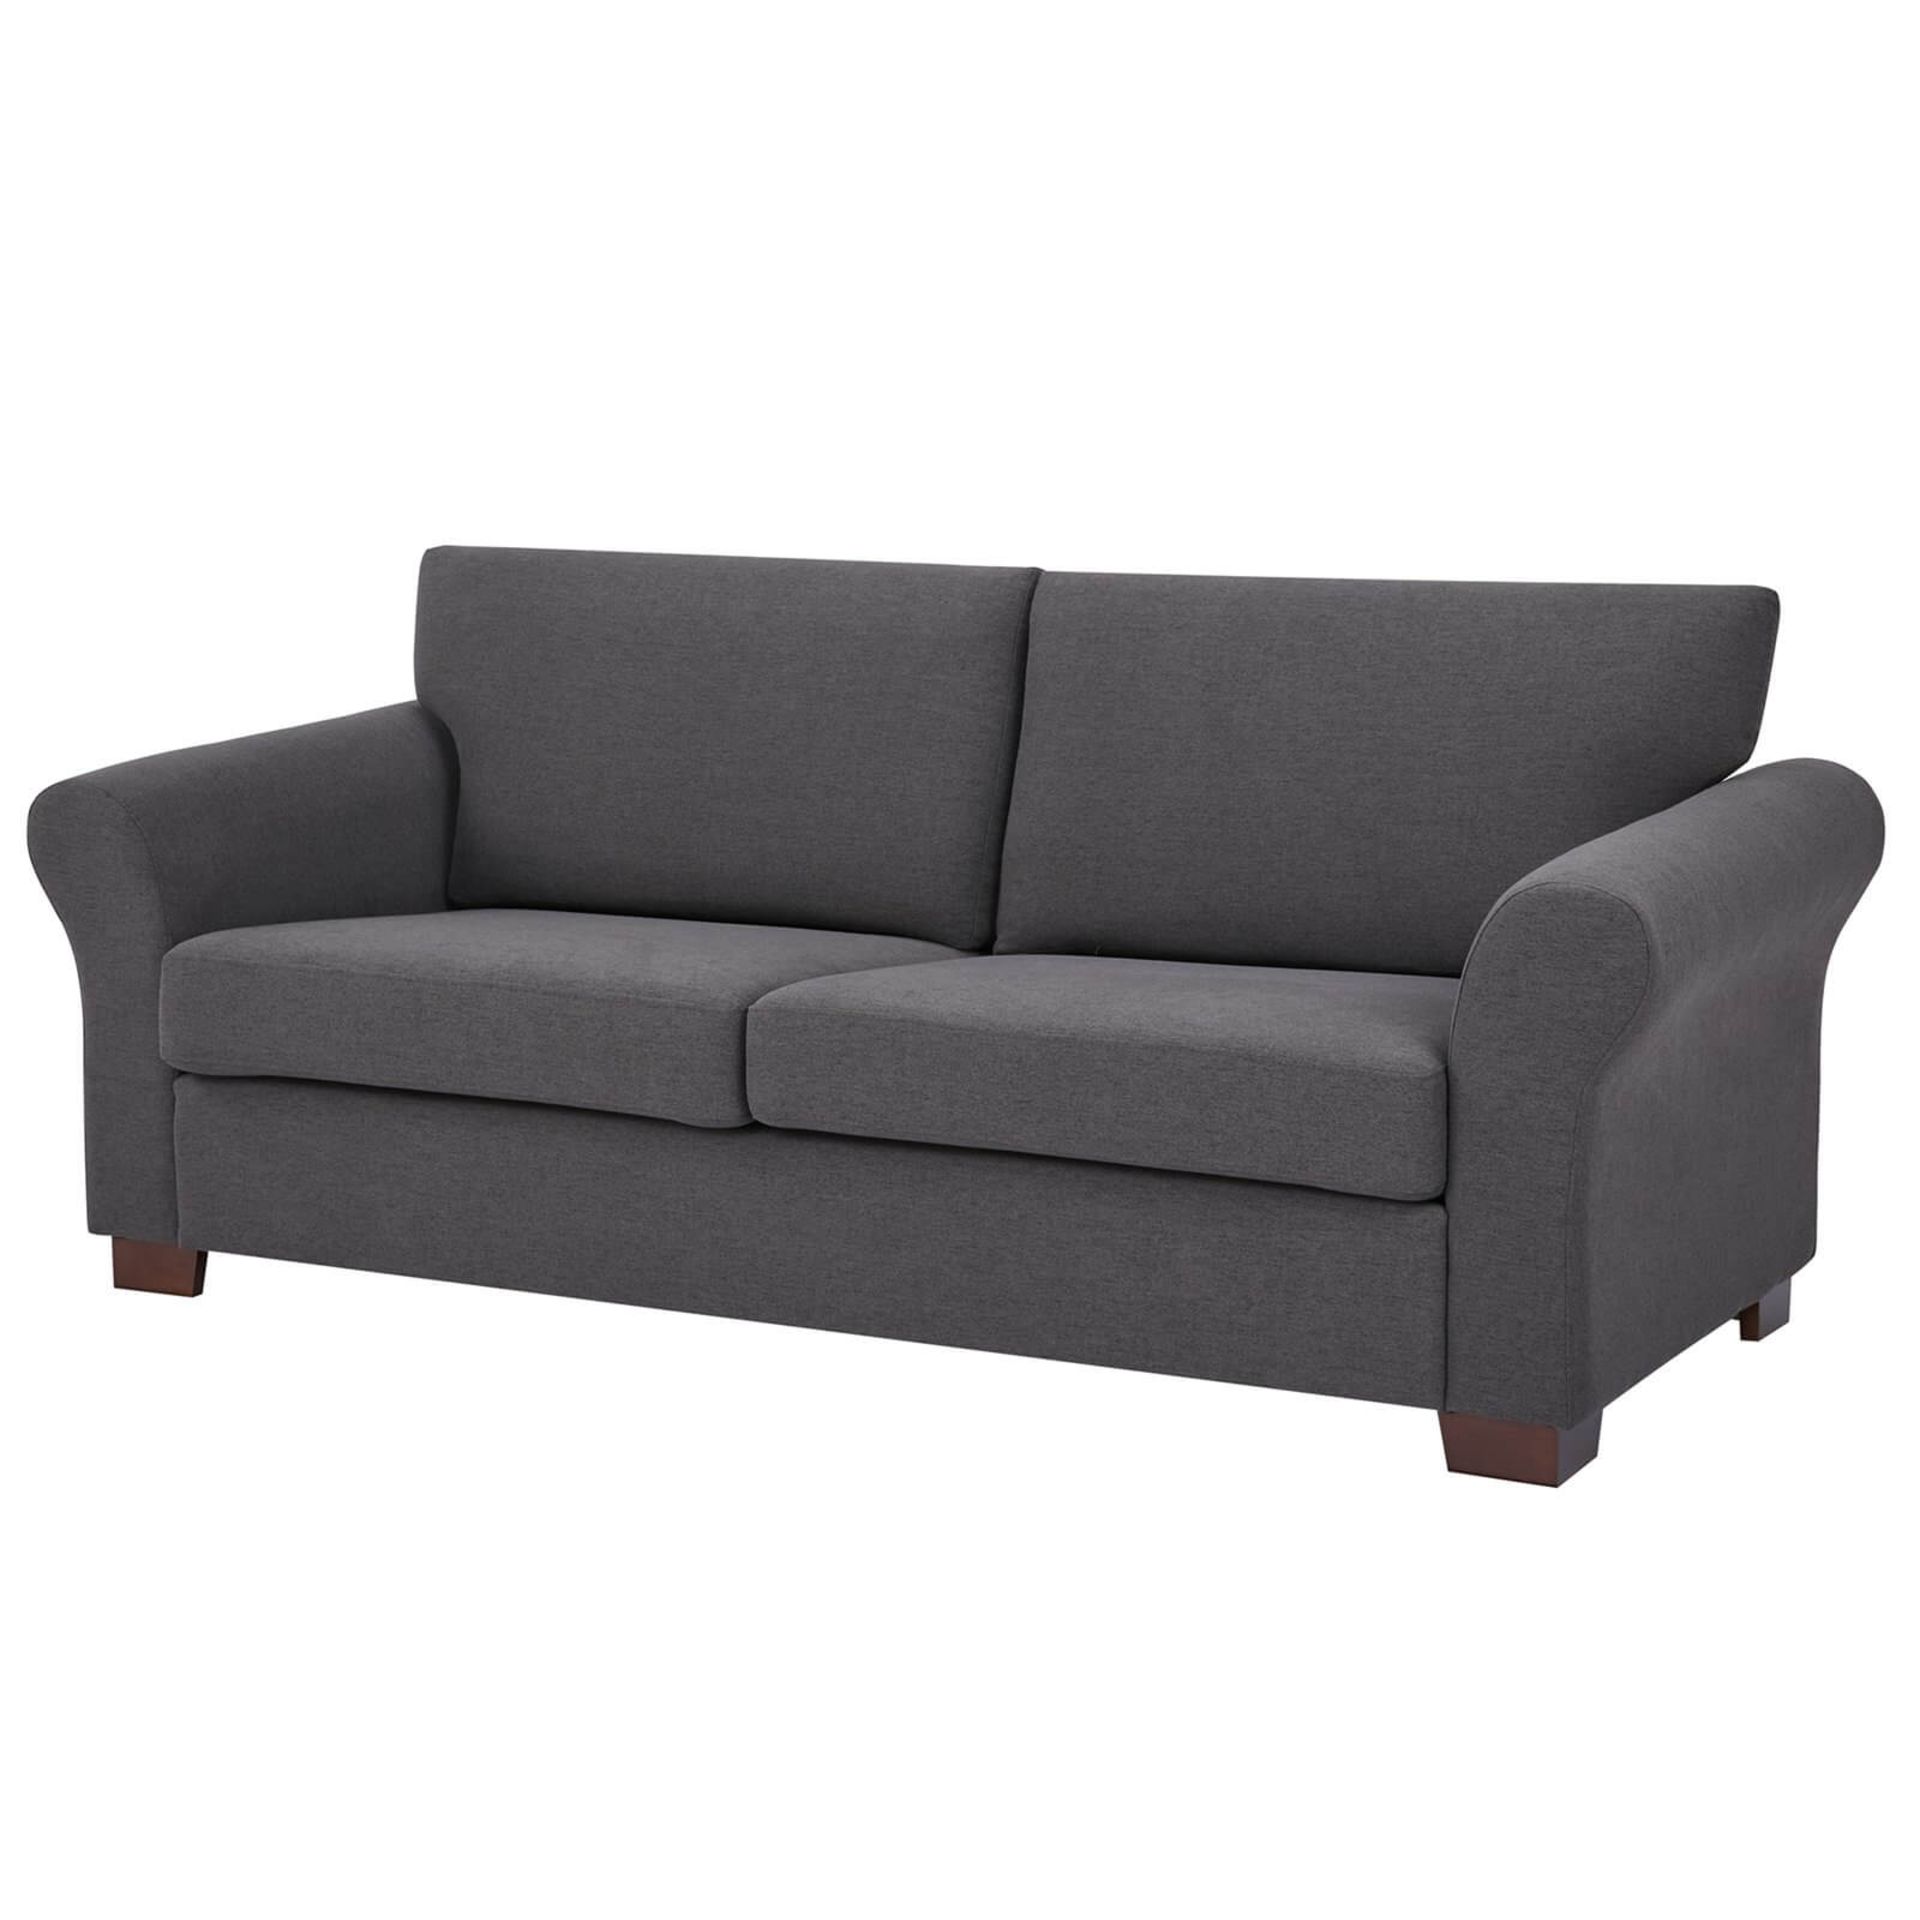 (R7P) 1 X Hayley Sofa Charcoal 3 Seater Sofa, Wooden Frame With Solid Beechwood Legs. 100% Polyest - Image 2 of 6